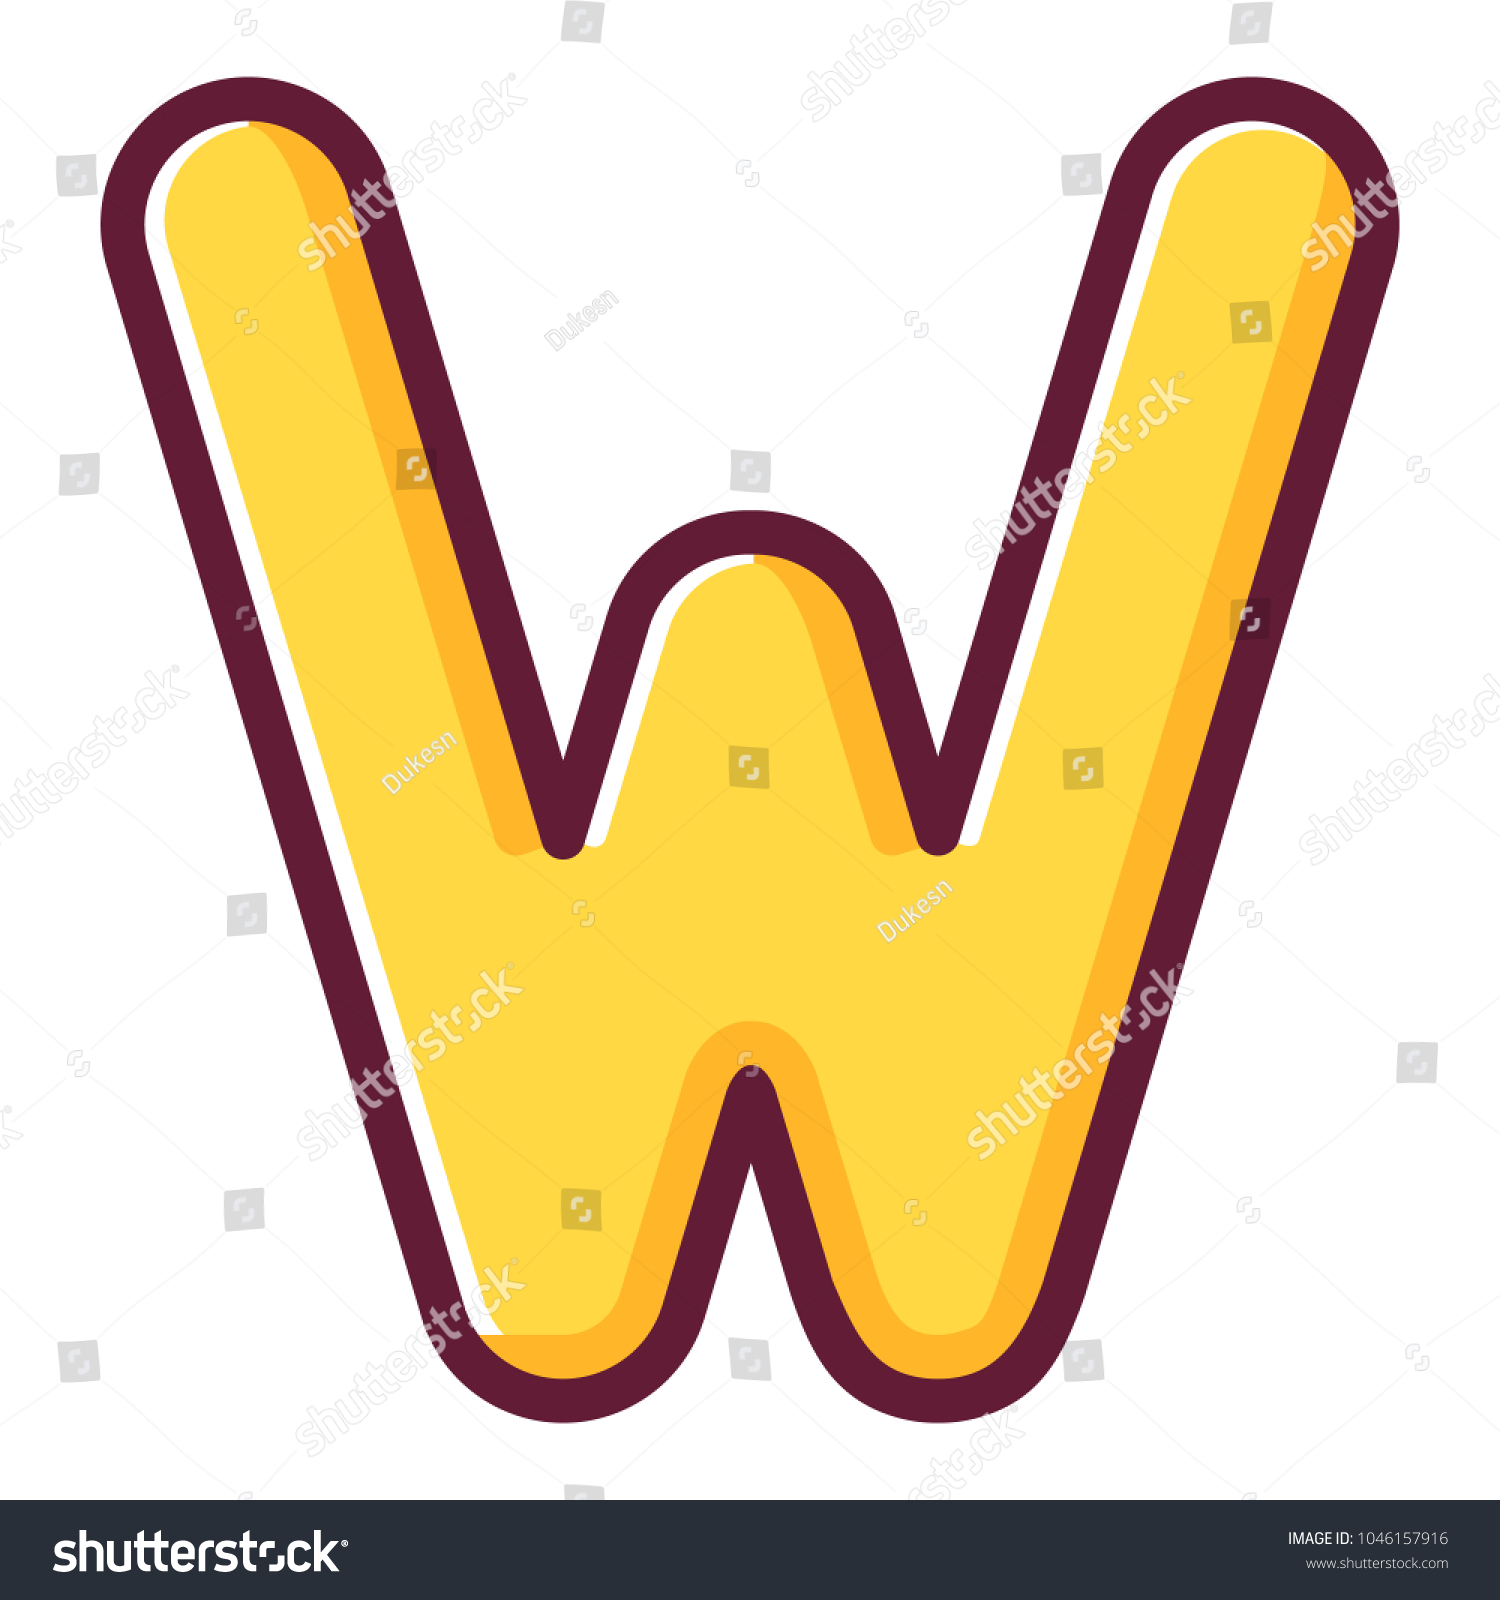 Letter W English Alphabet Alphabetic Character Stock Vector Royalty Free 1046157916